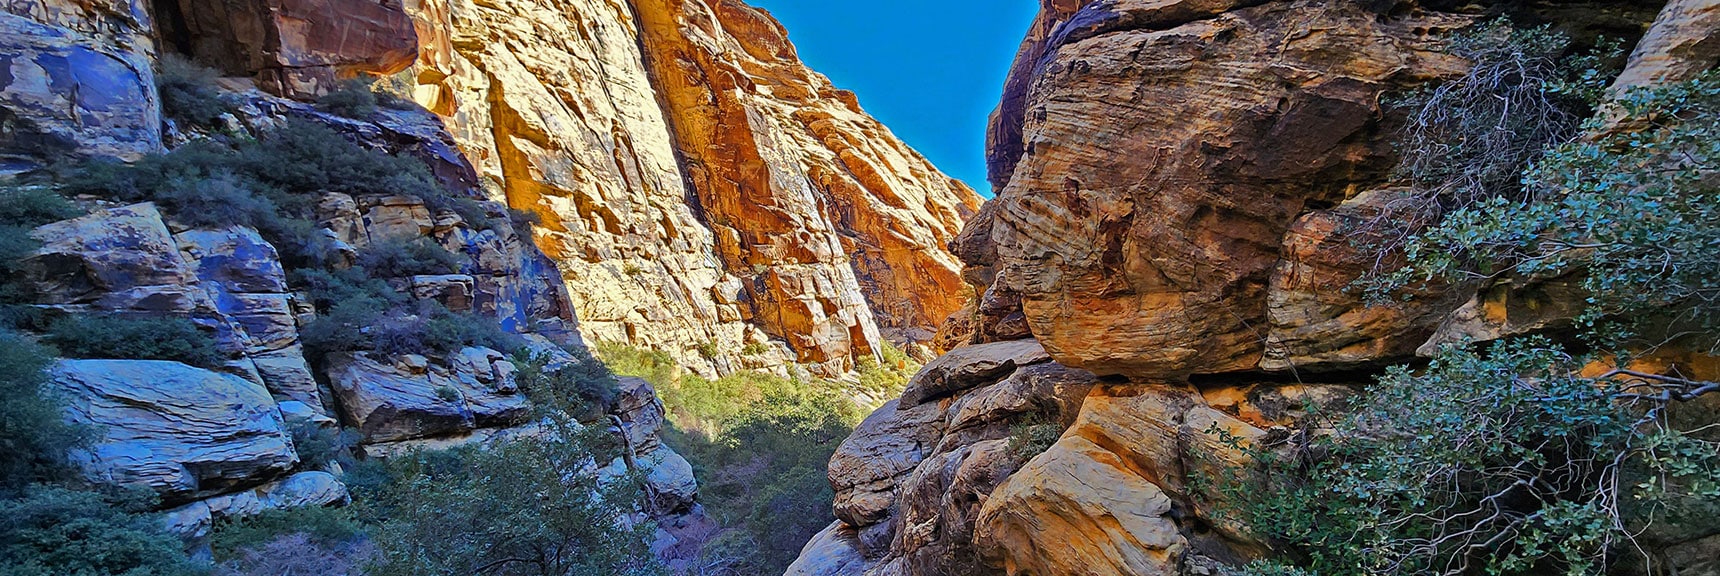 View Back Down Canyon from That Final Ledge Passageway | Ice Box Canyon | Red Rock Canyon NCA, Nevada | Las Vegas Area Trails | David Smith